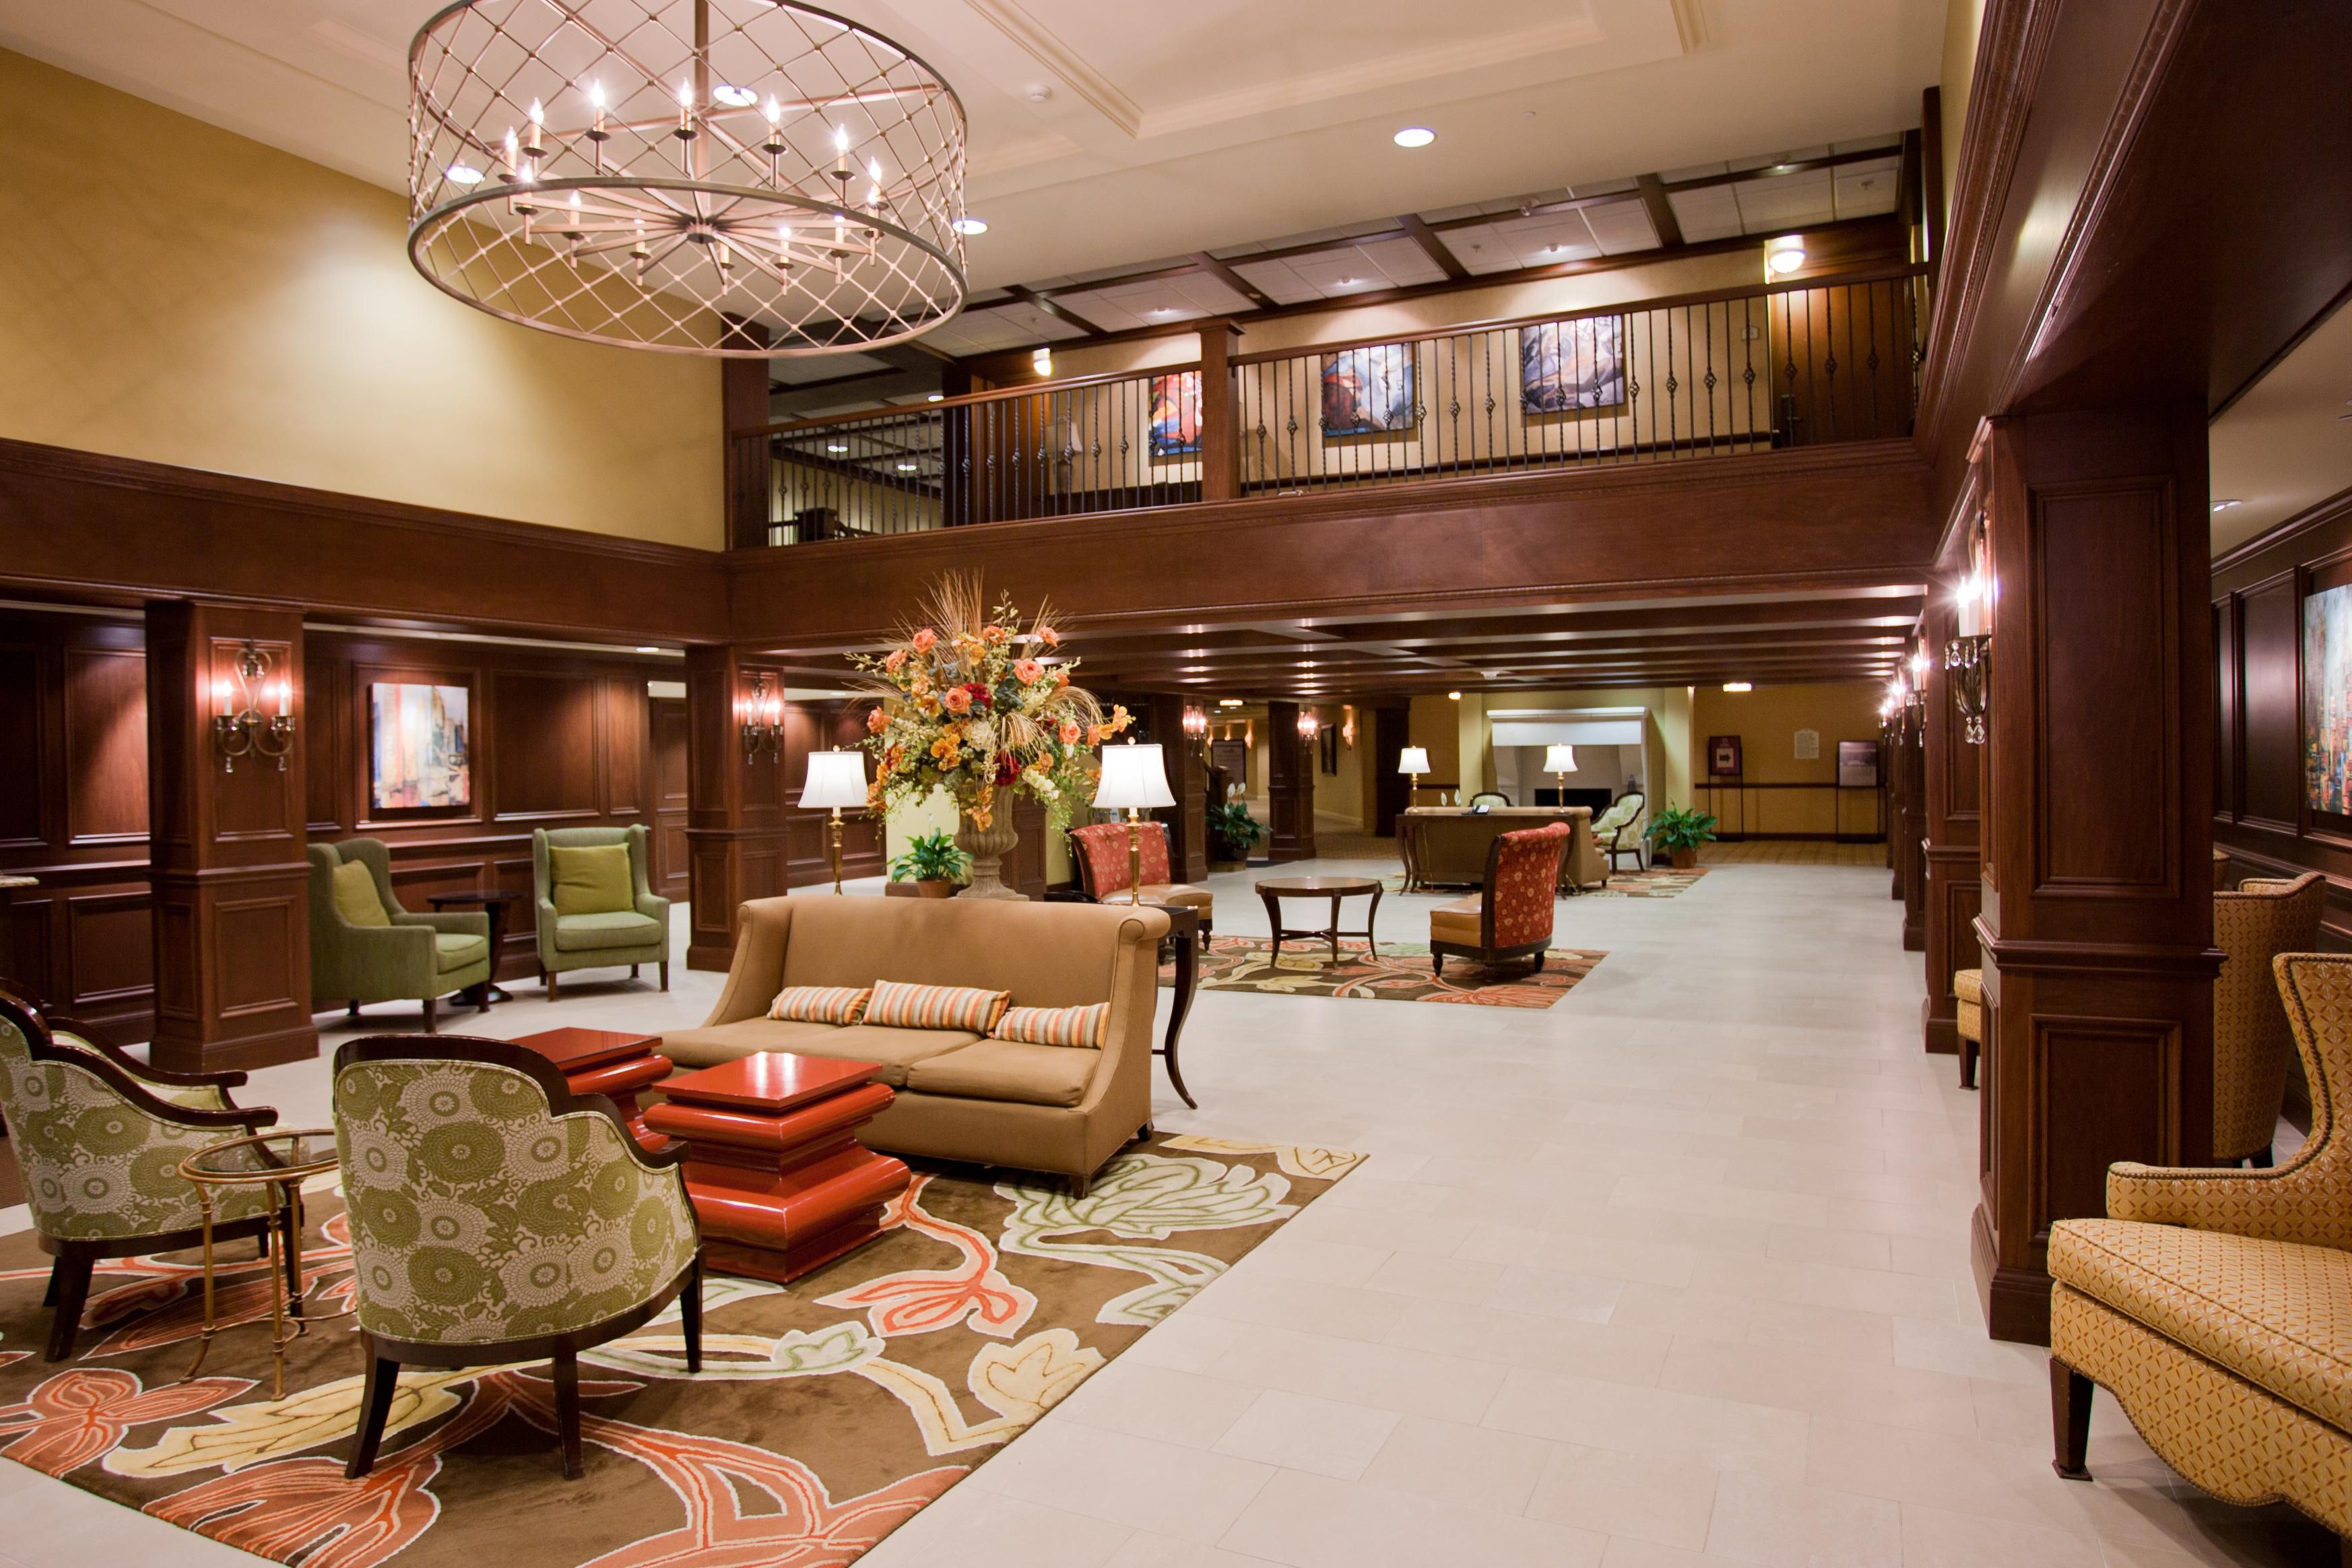 Relax in our spacious and comfortable lobby